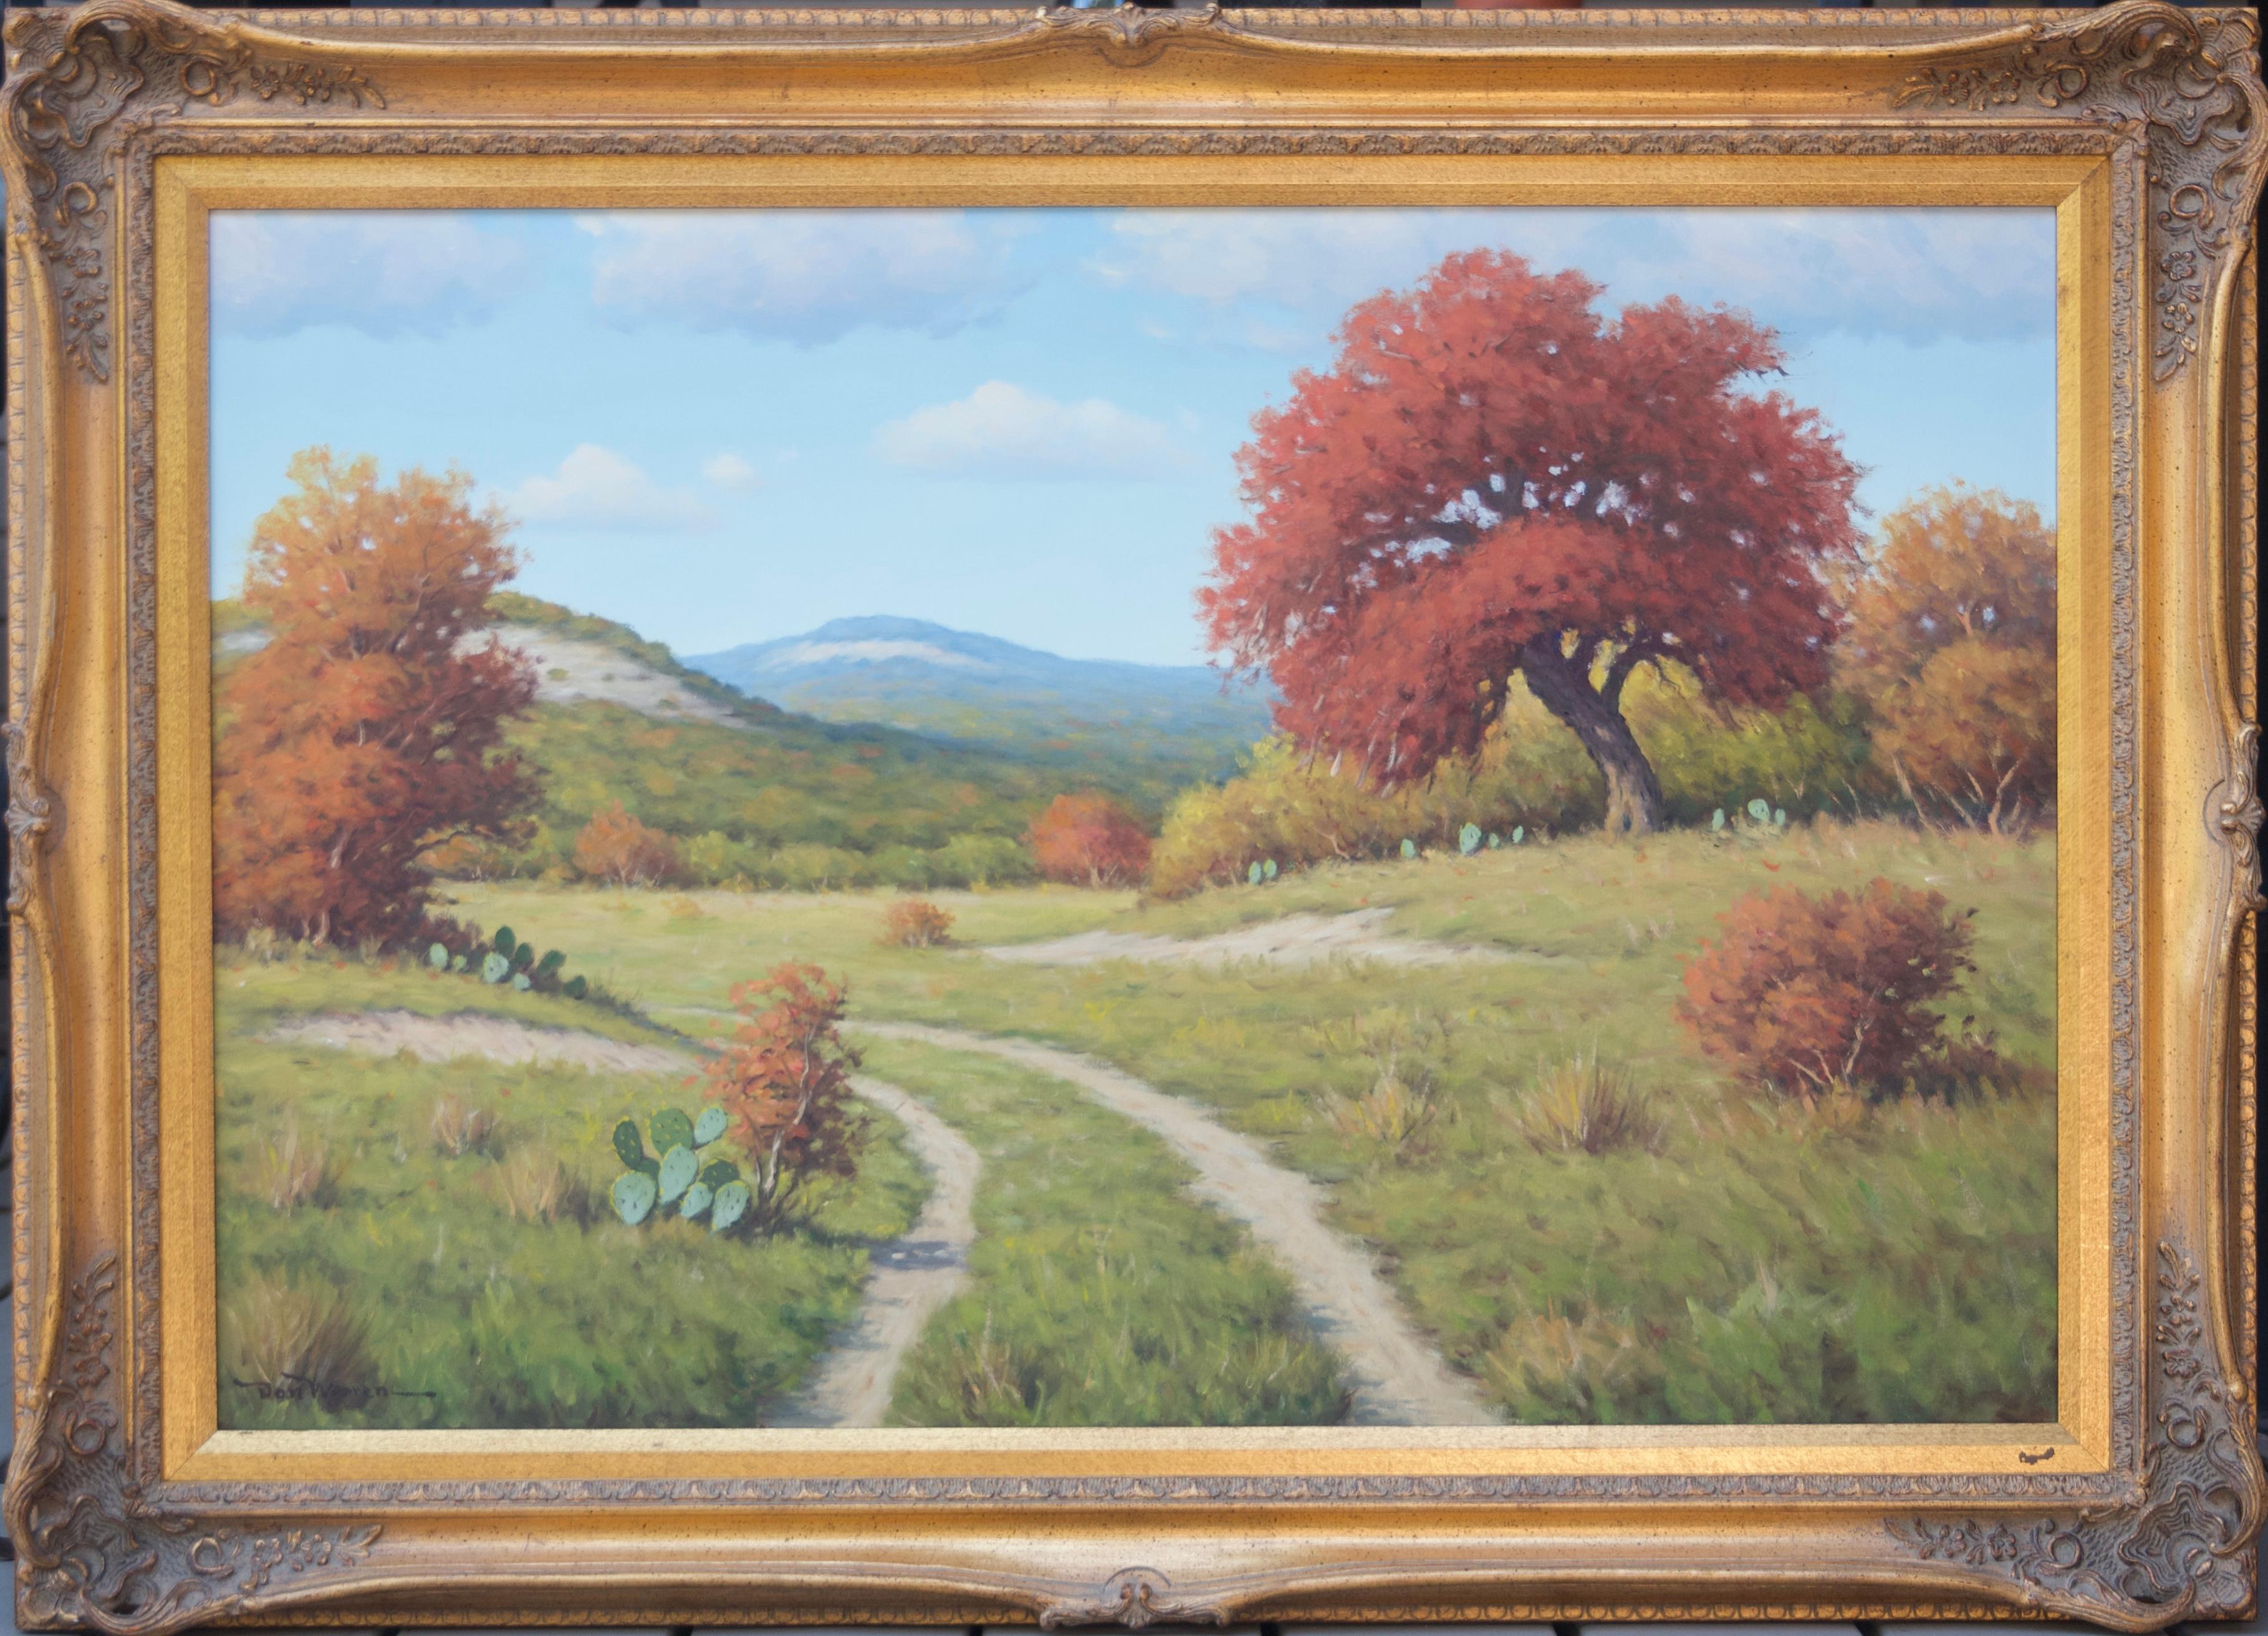 Hill Country Landscape - Autumn Trees and Wheel Ruts - Painting by Don Warren